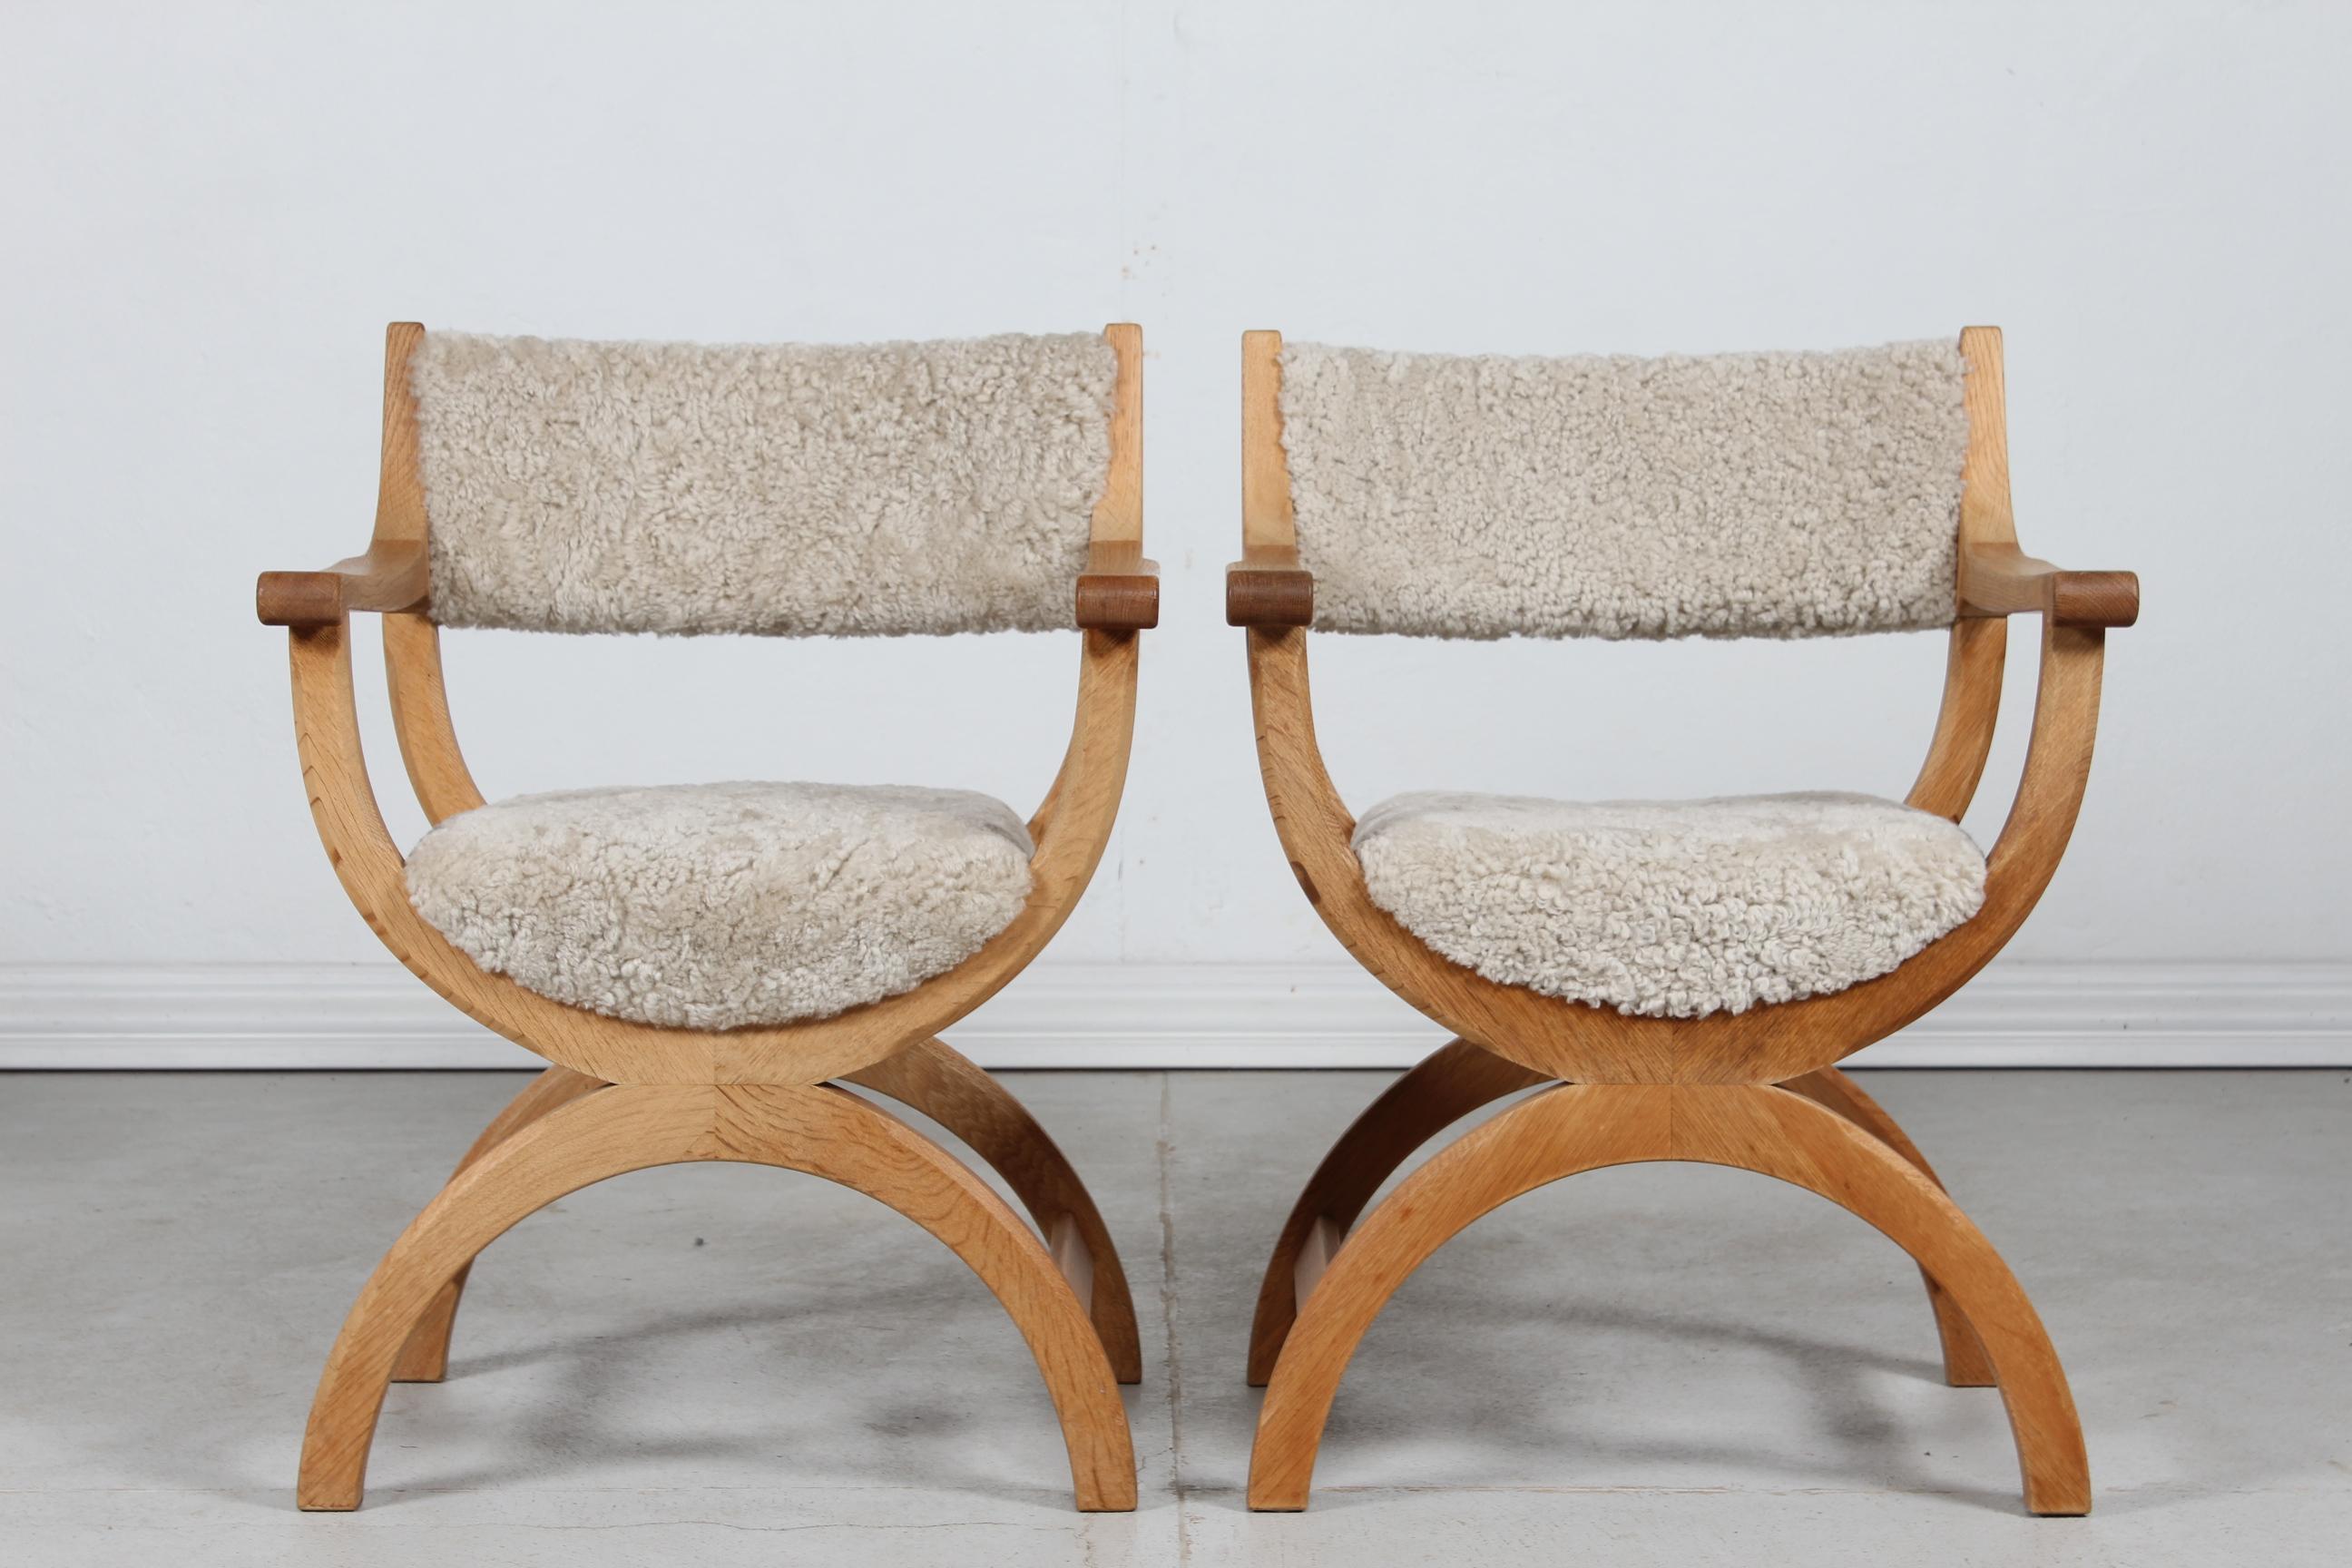 A pair of Danish vintage Henning Kjærnulf kurul chairs with armrest manufactured by EG / Nyrup Møbler in Denmark

The armchairs are made of solid oak upholstered with new sheepskin which is very comfortable and 